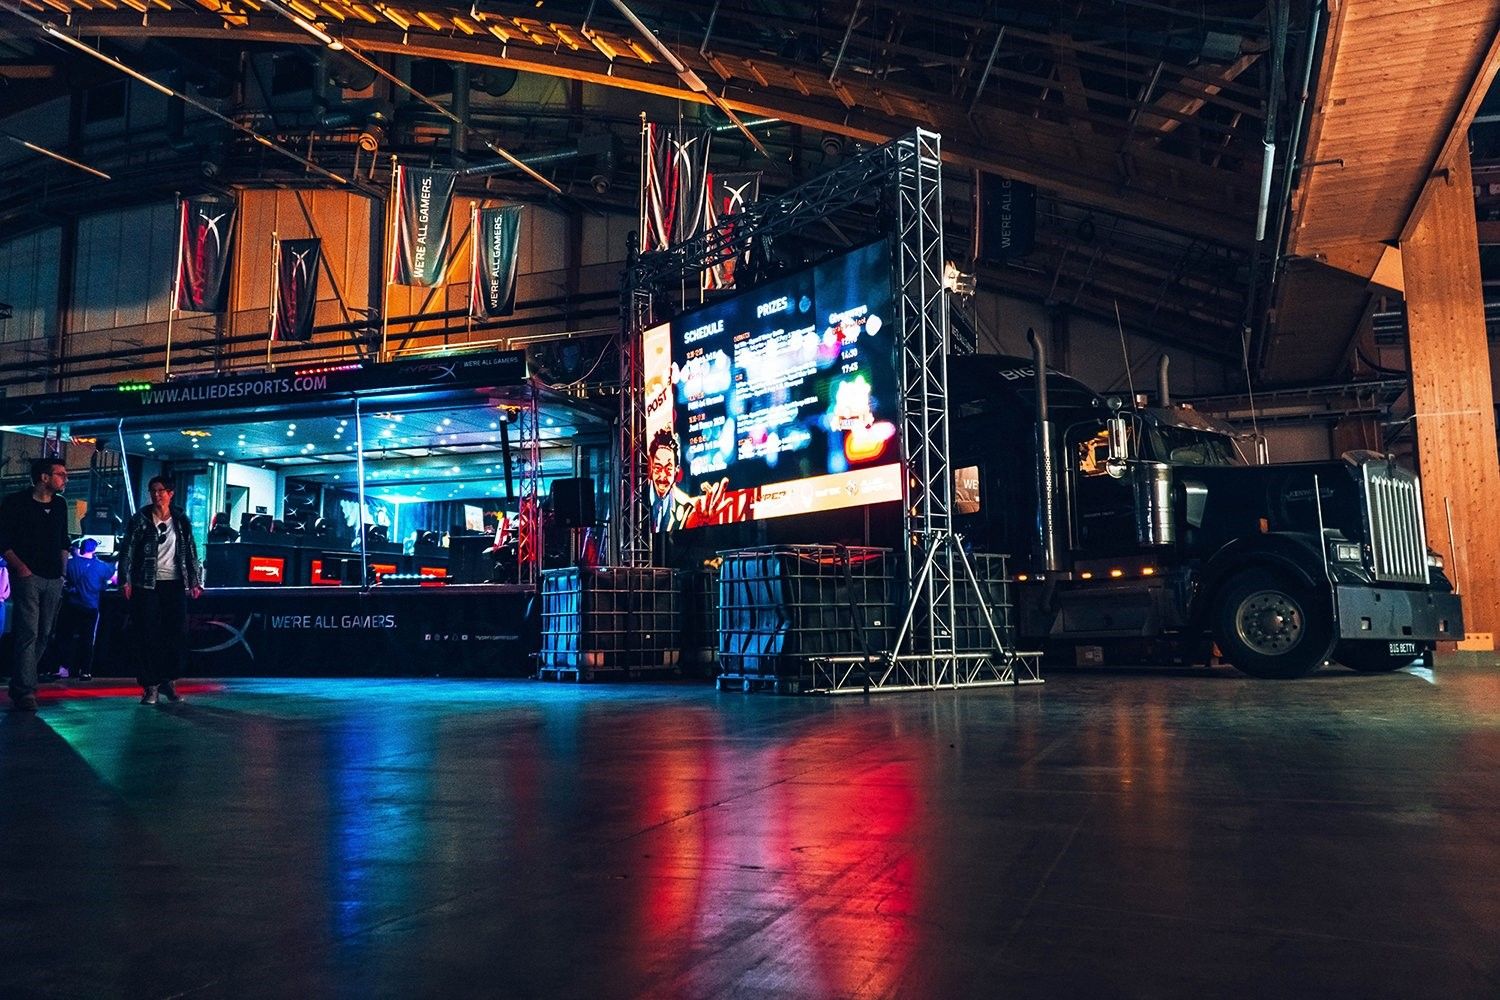 ICE London will see Clarion confirm details of £100,000 Autumn esports tournament